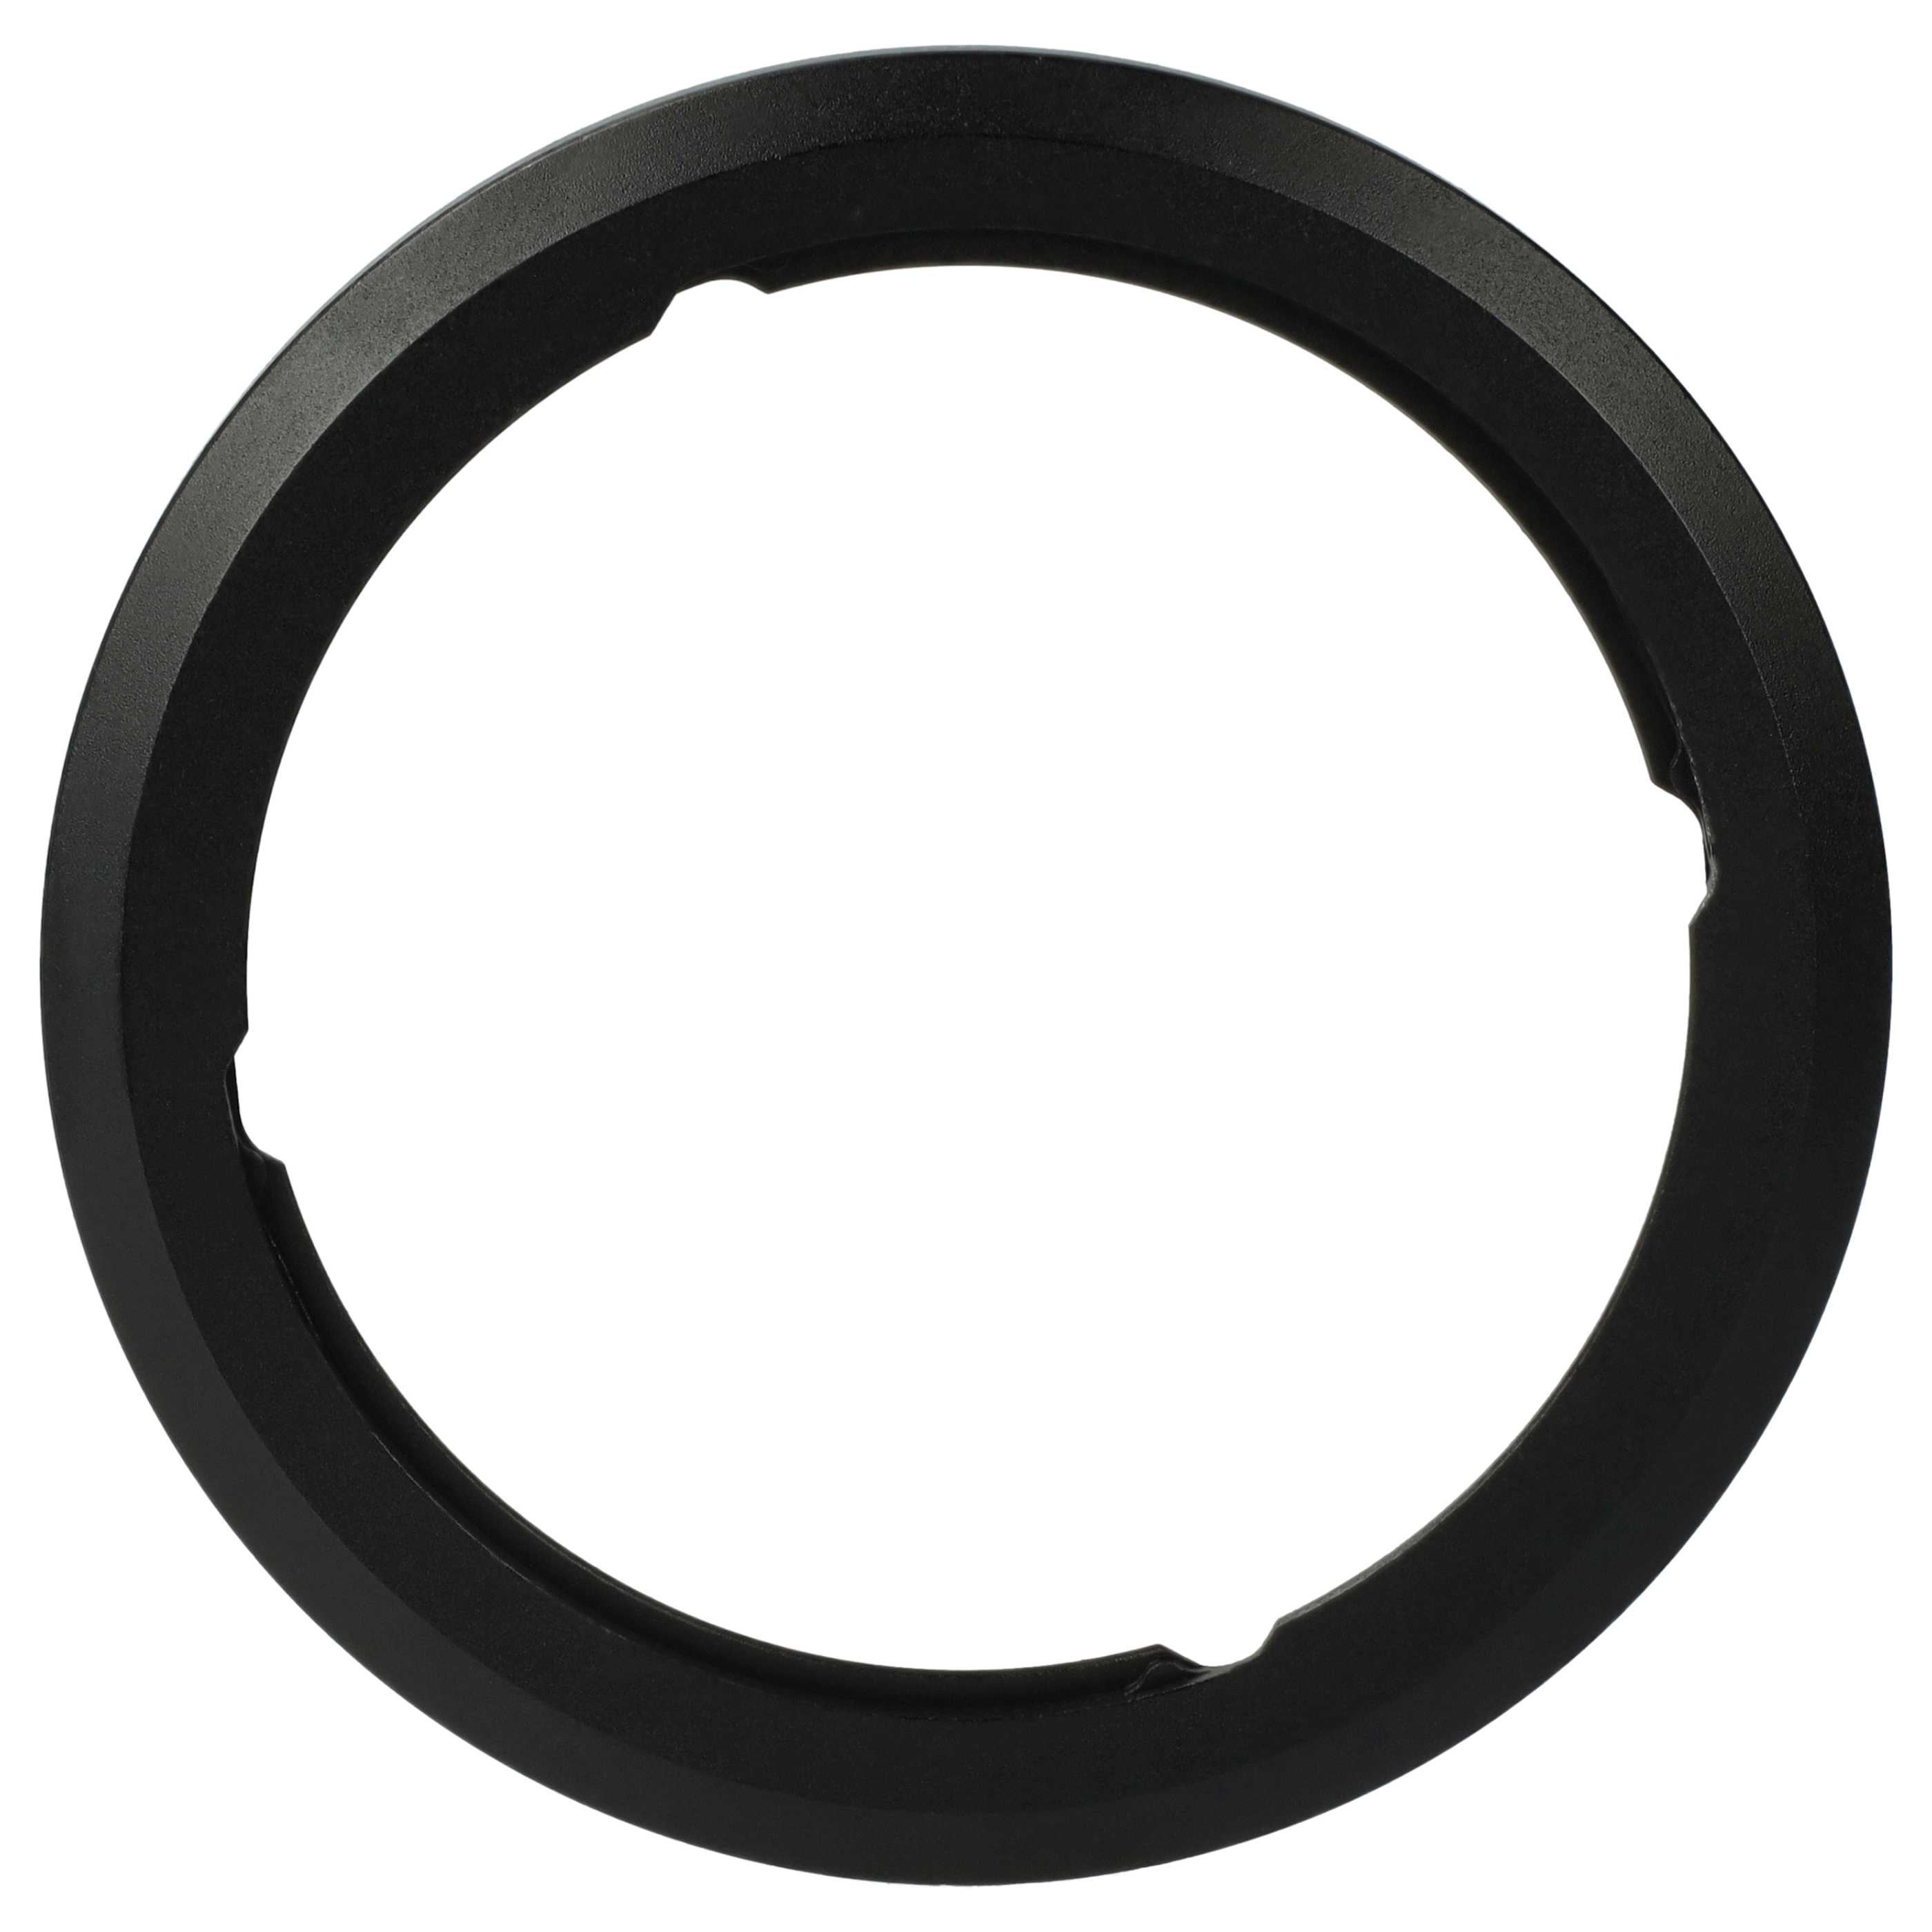 Filter Adapter replaces Canon FA-DC67A for Camera Lens